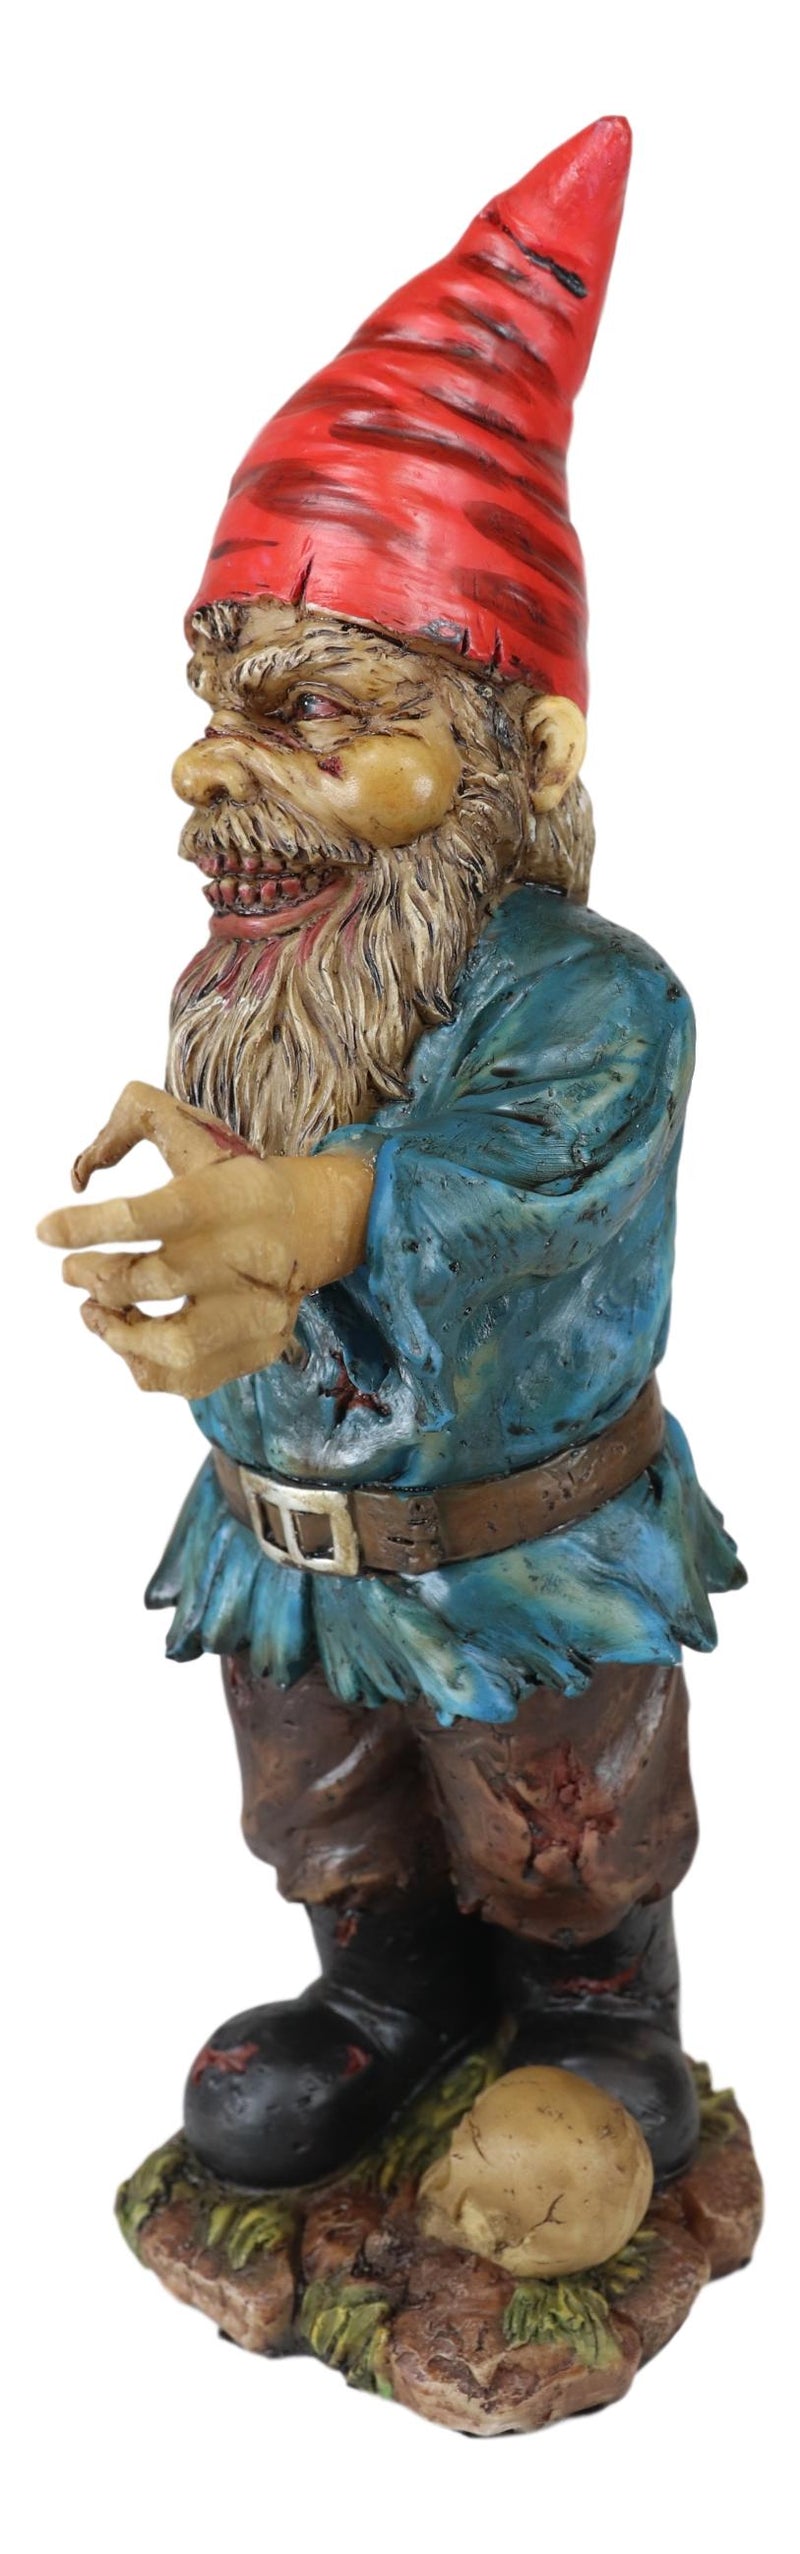 Walking Dead Standing Zombie Gnome With Severed Hand Garden Statue 11.5" High